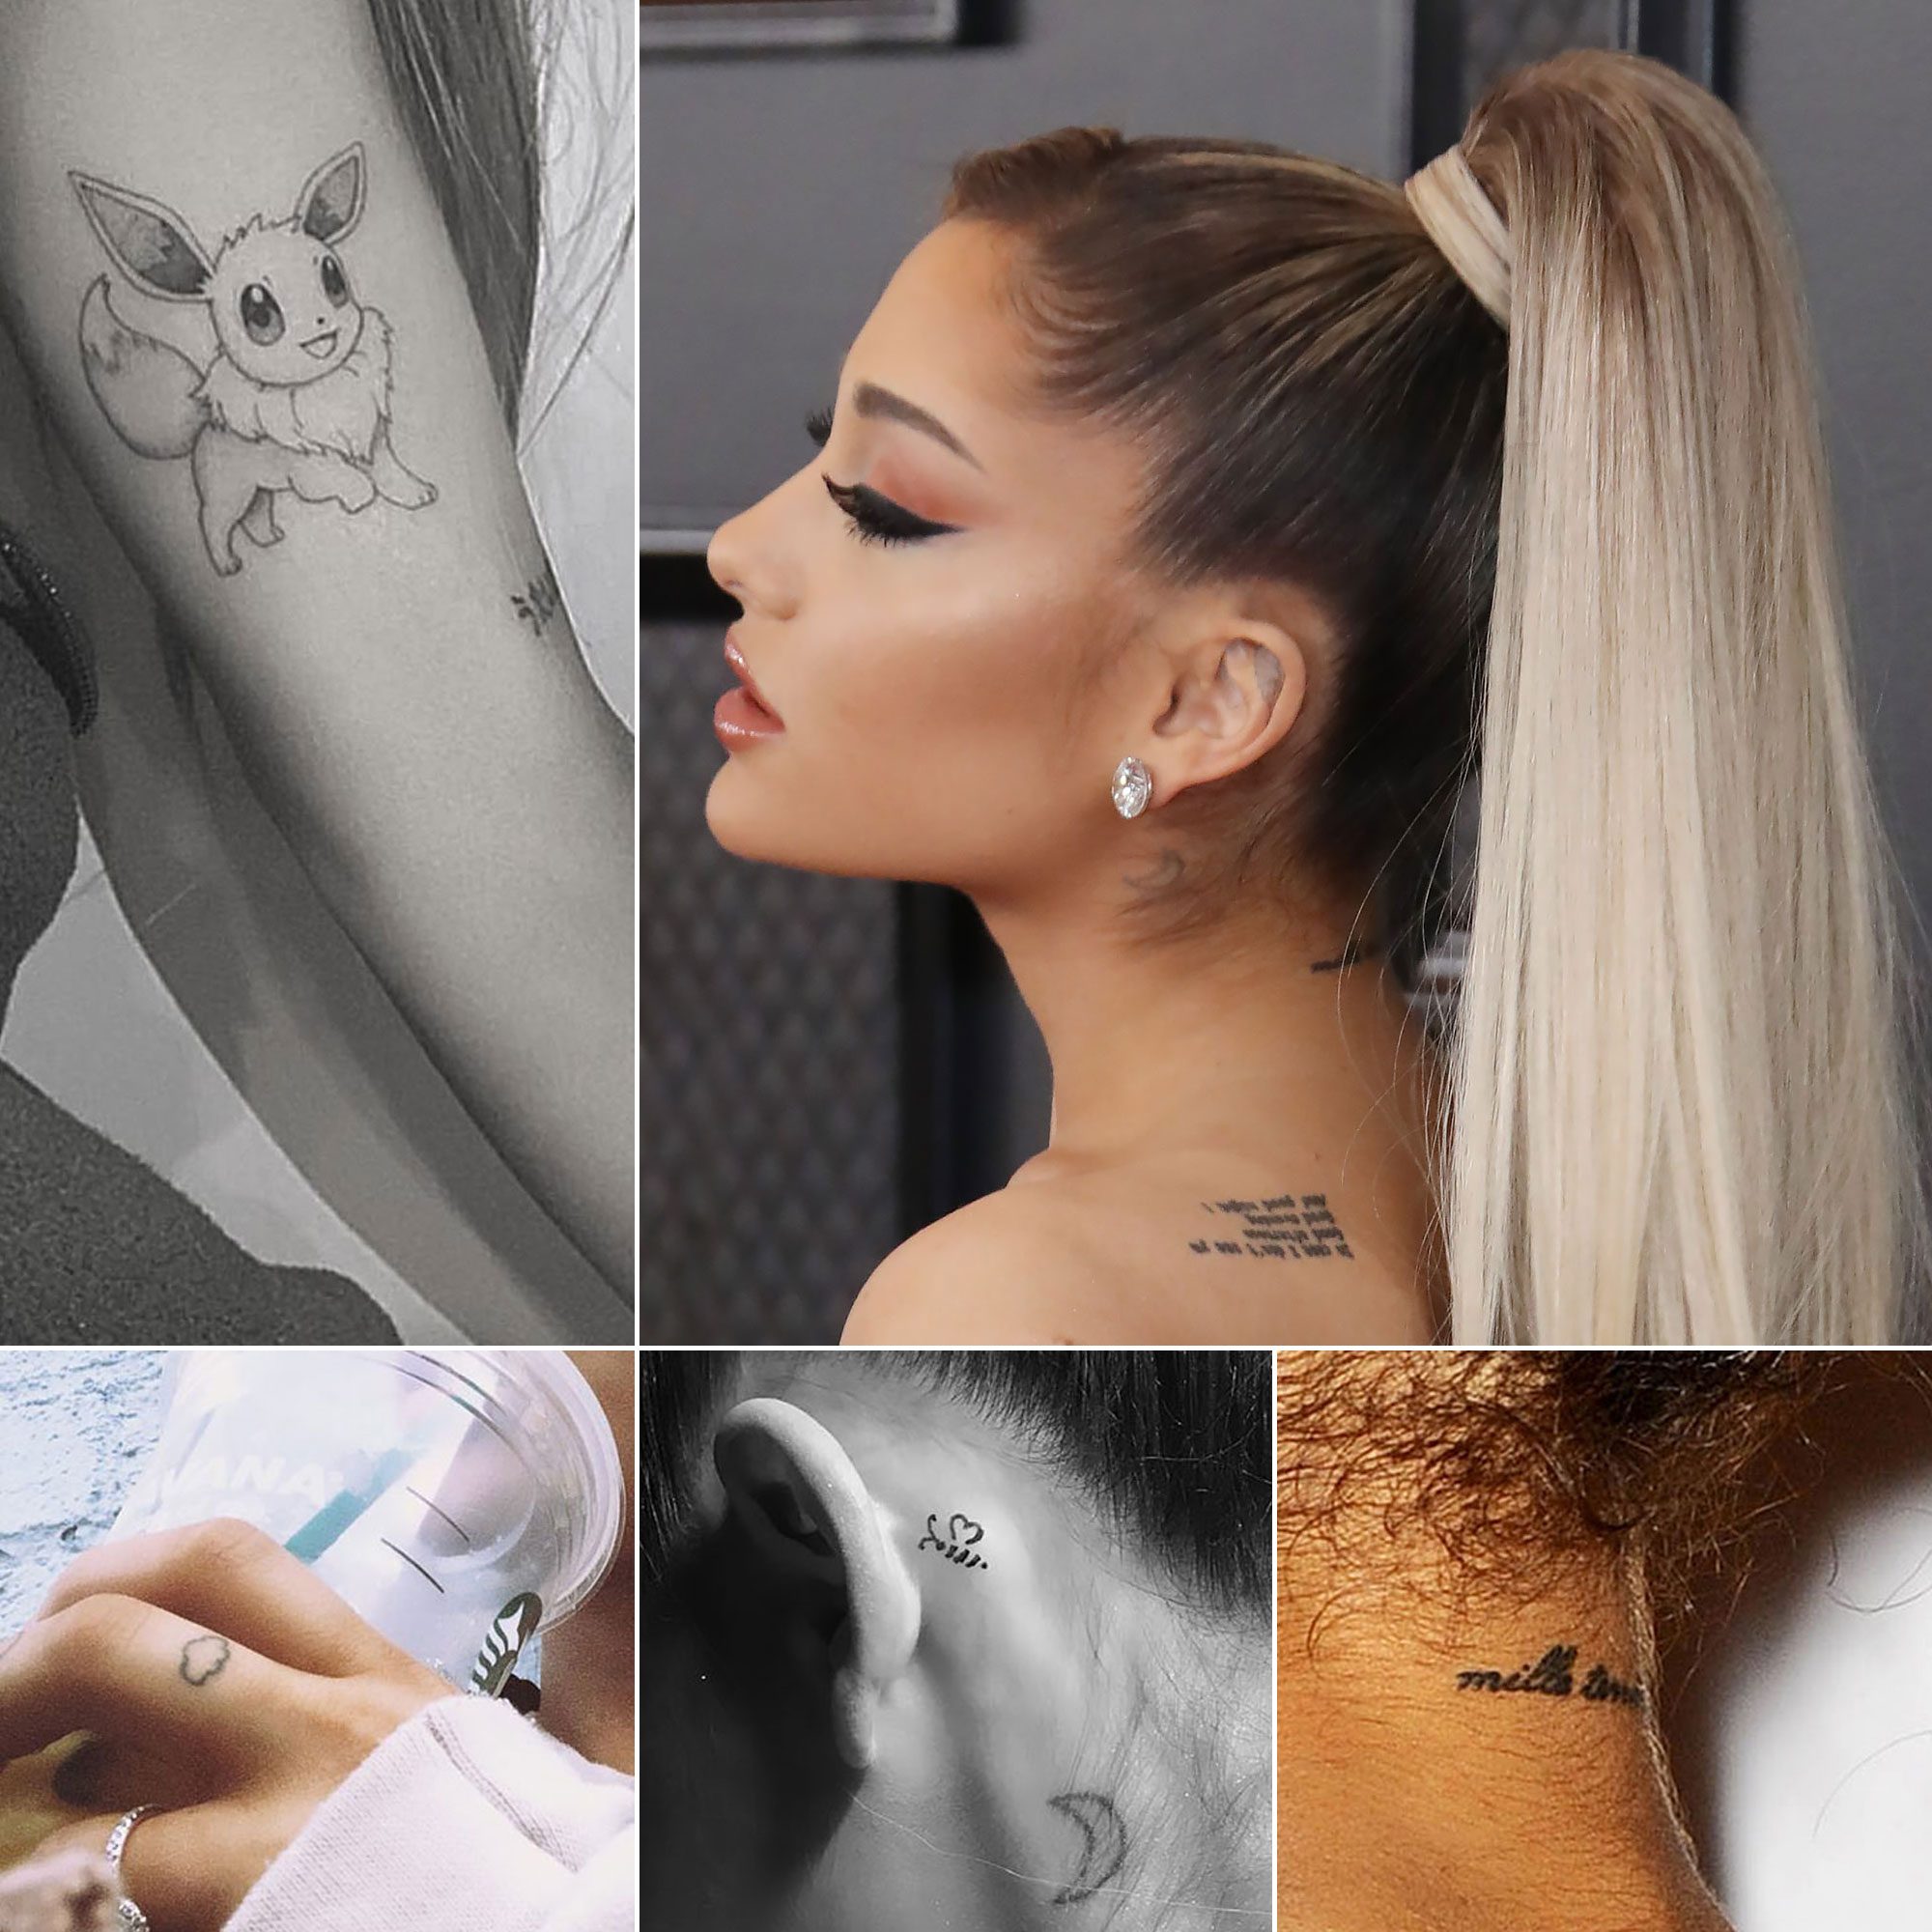 A Comprehensive Guide to Tattoo Meanings